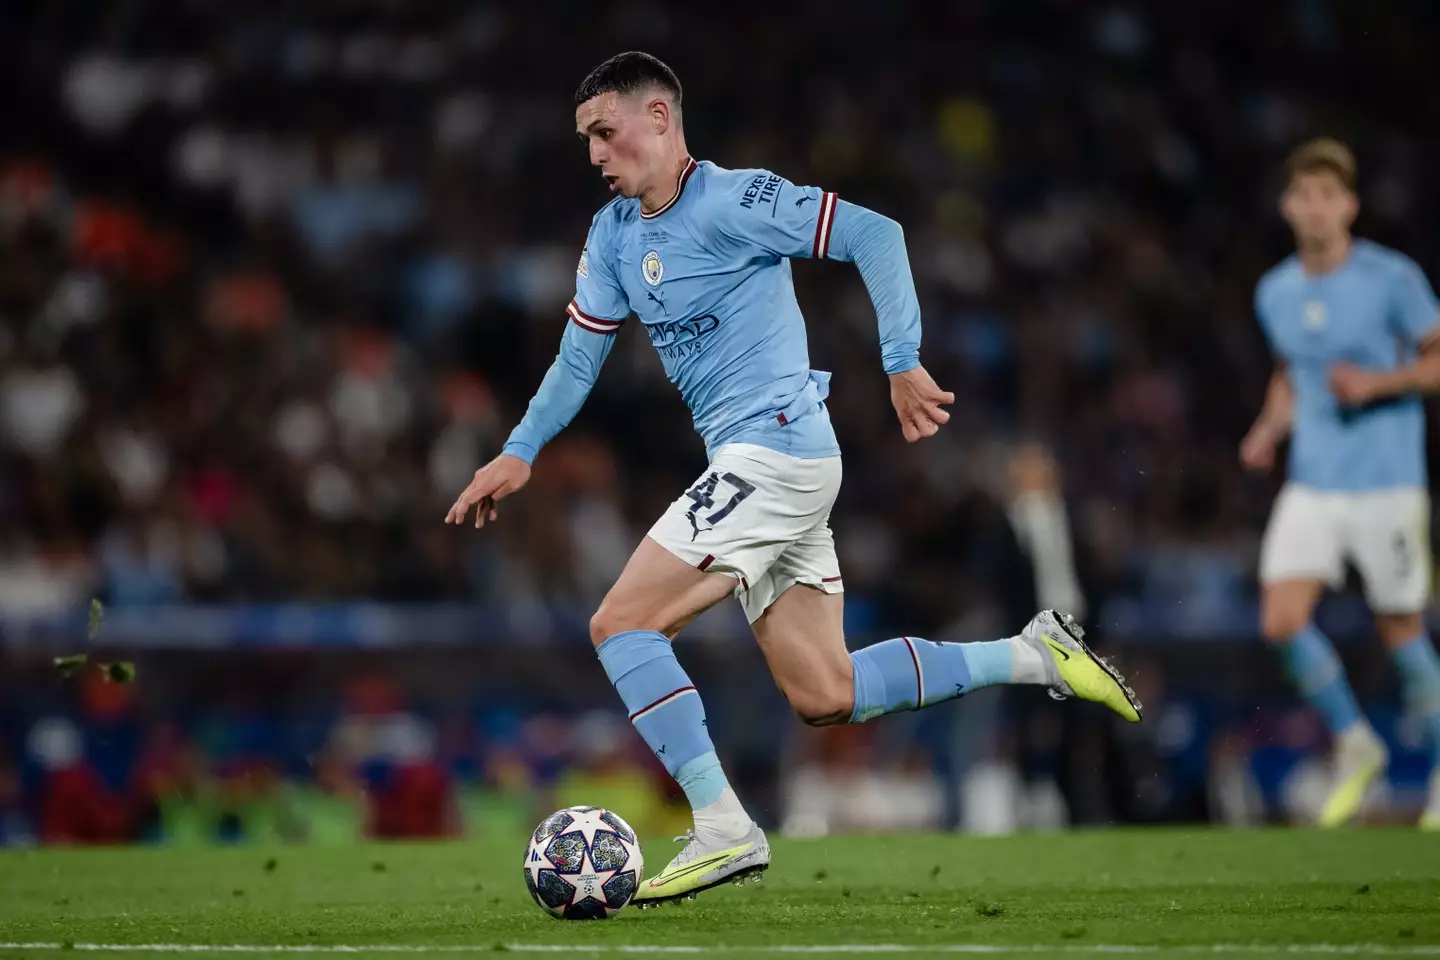 Phil Foden has an integral role to play for City this season. (Image: Getty)